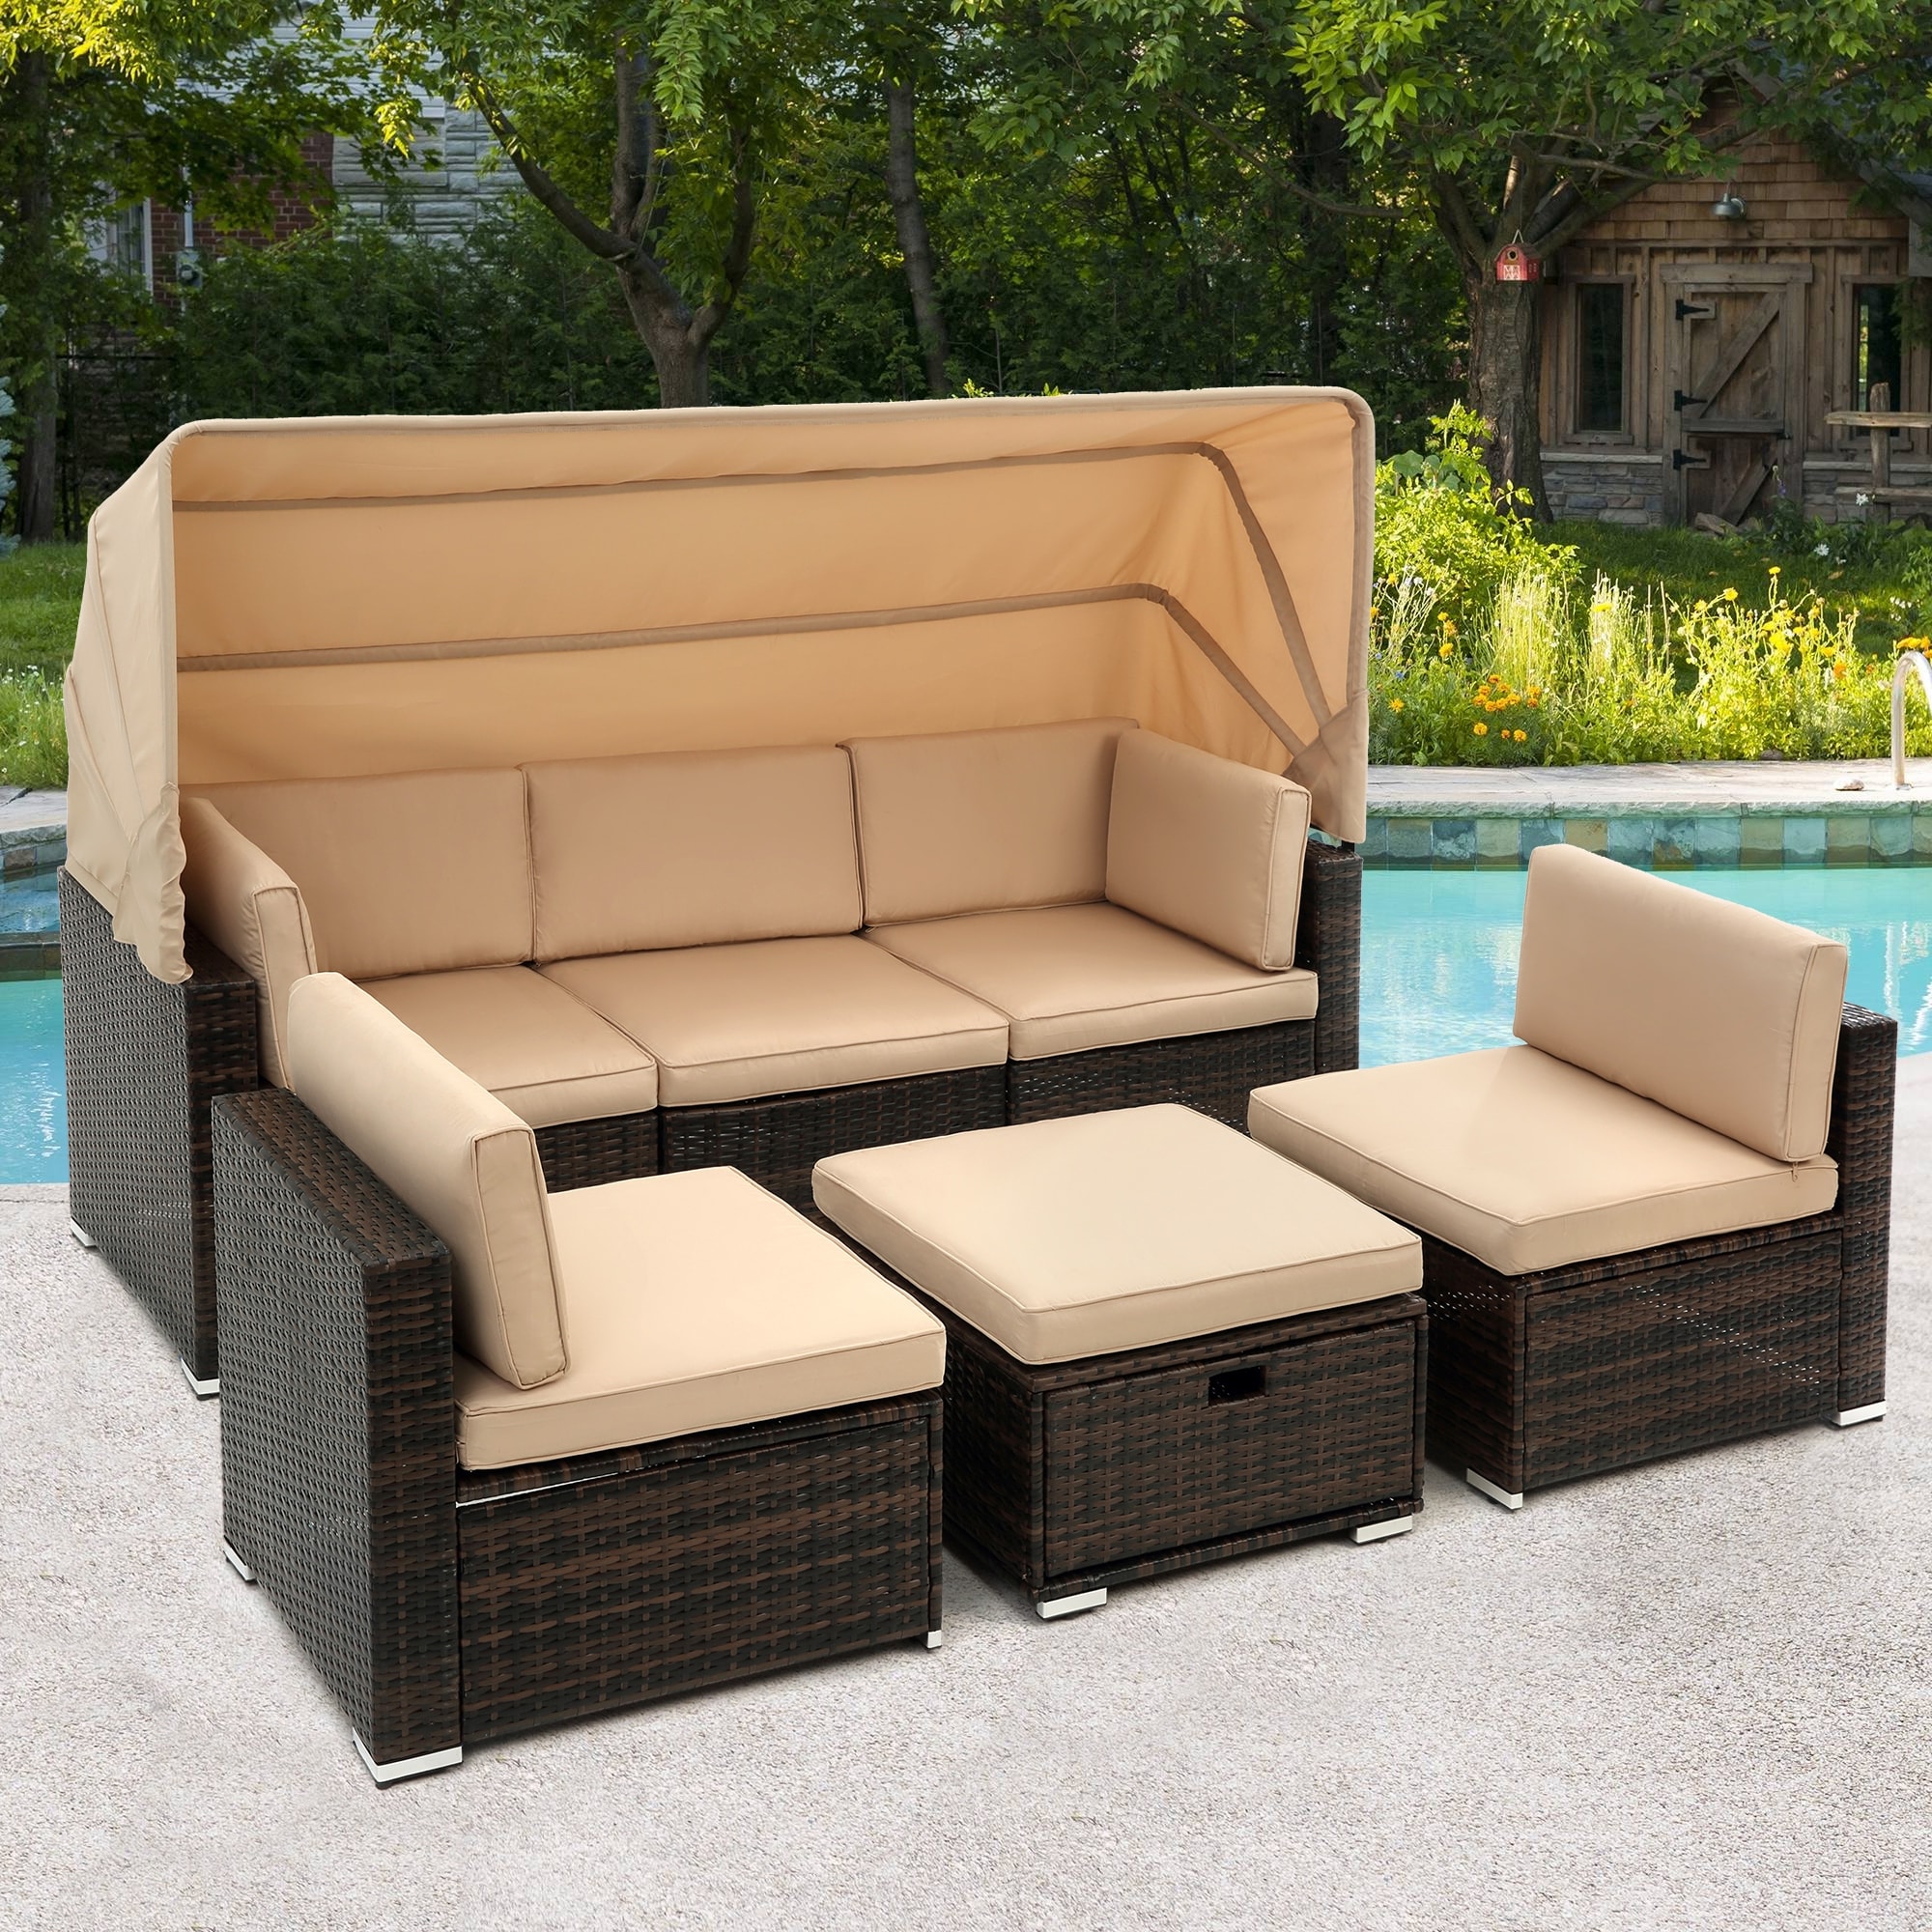 Modern Outdoor Sunbathing Rattan Sofa Wholesale Steel Pool Furniture Chaise Metal Chair Modular Sectional Sofa Sets With Roof